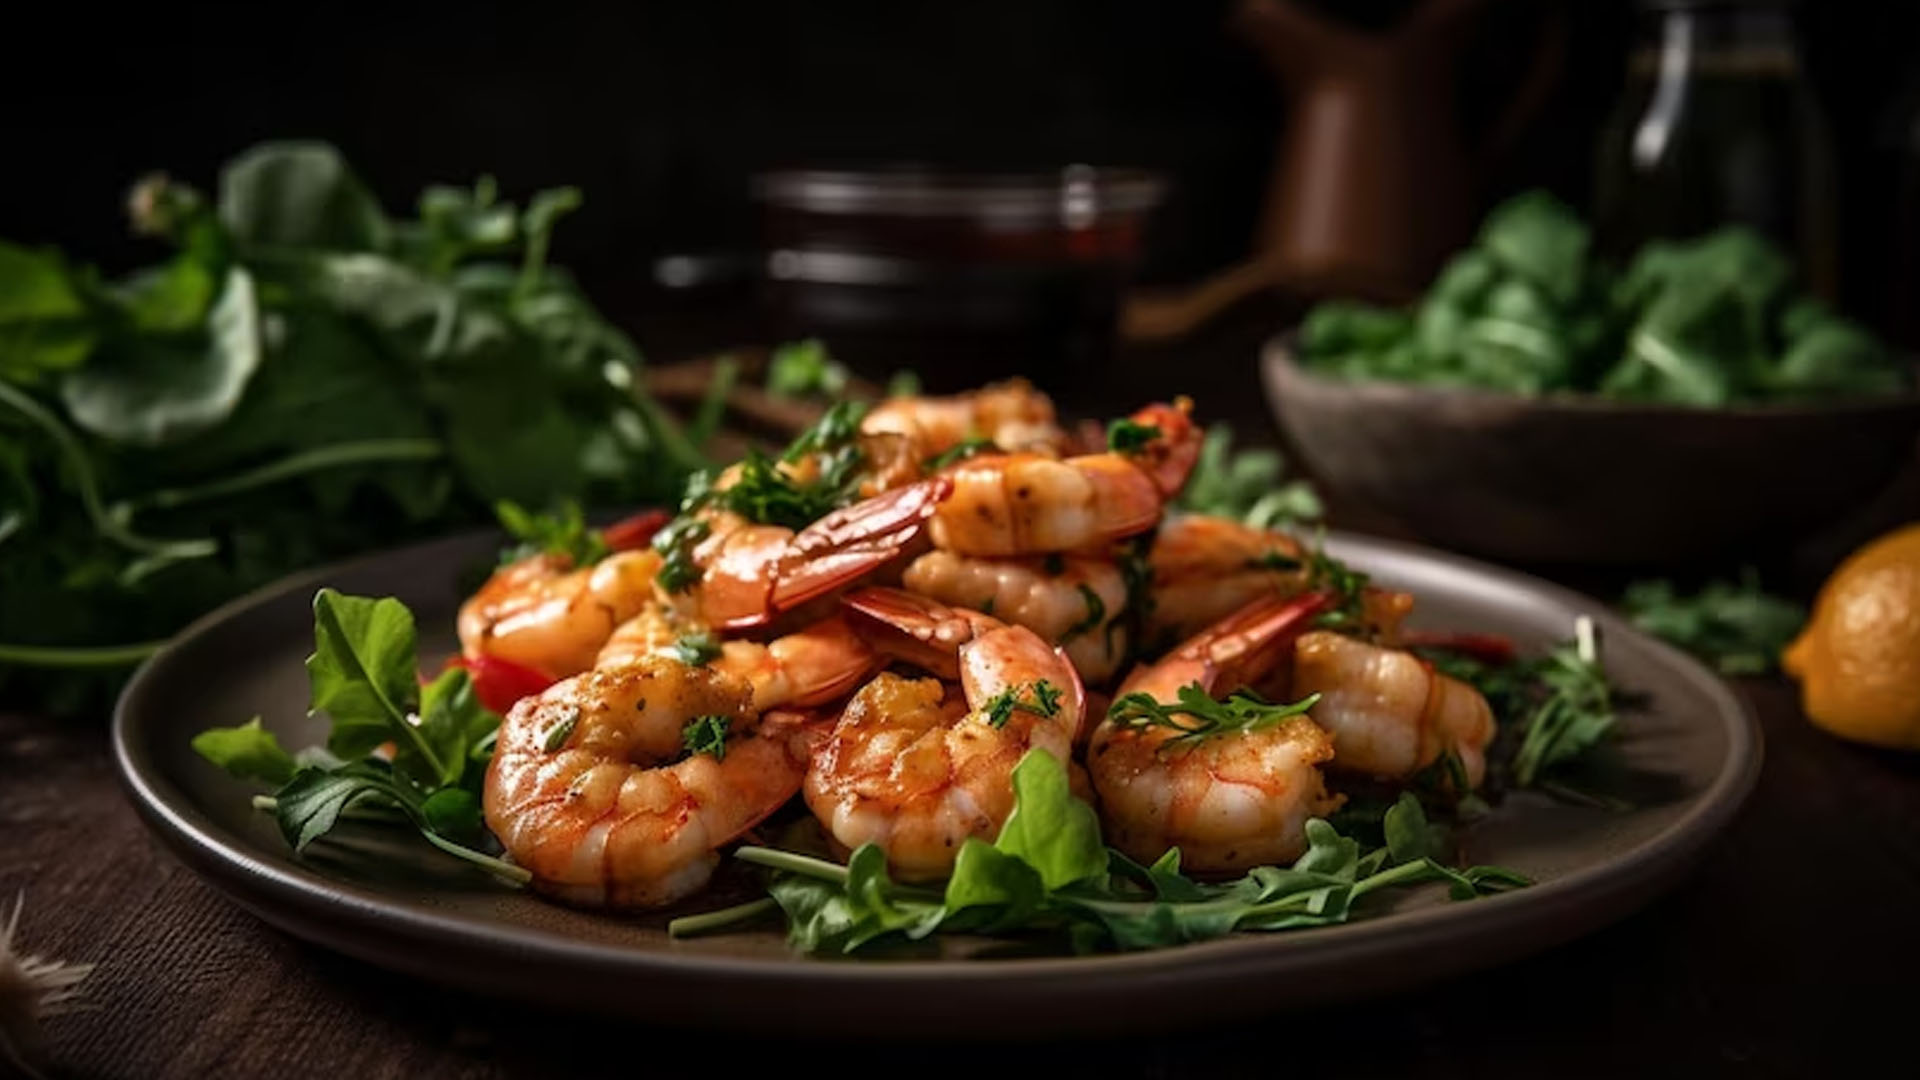 What Are The Health Benefits of Prawns?